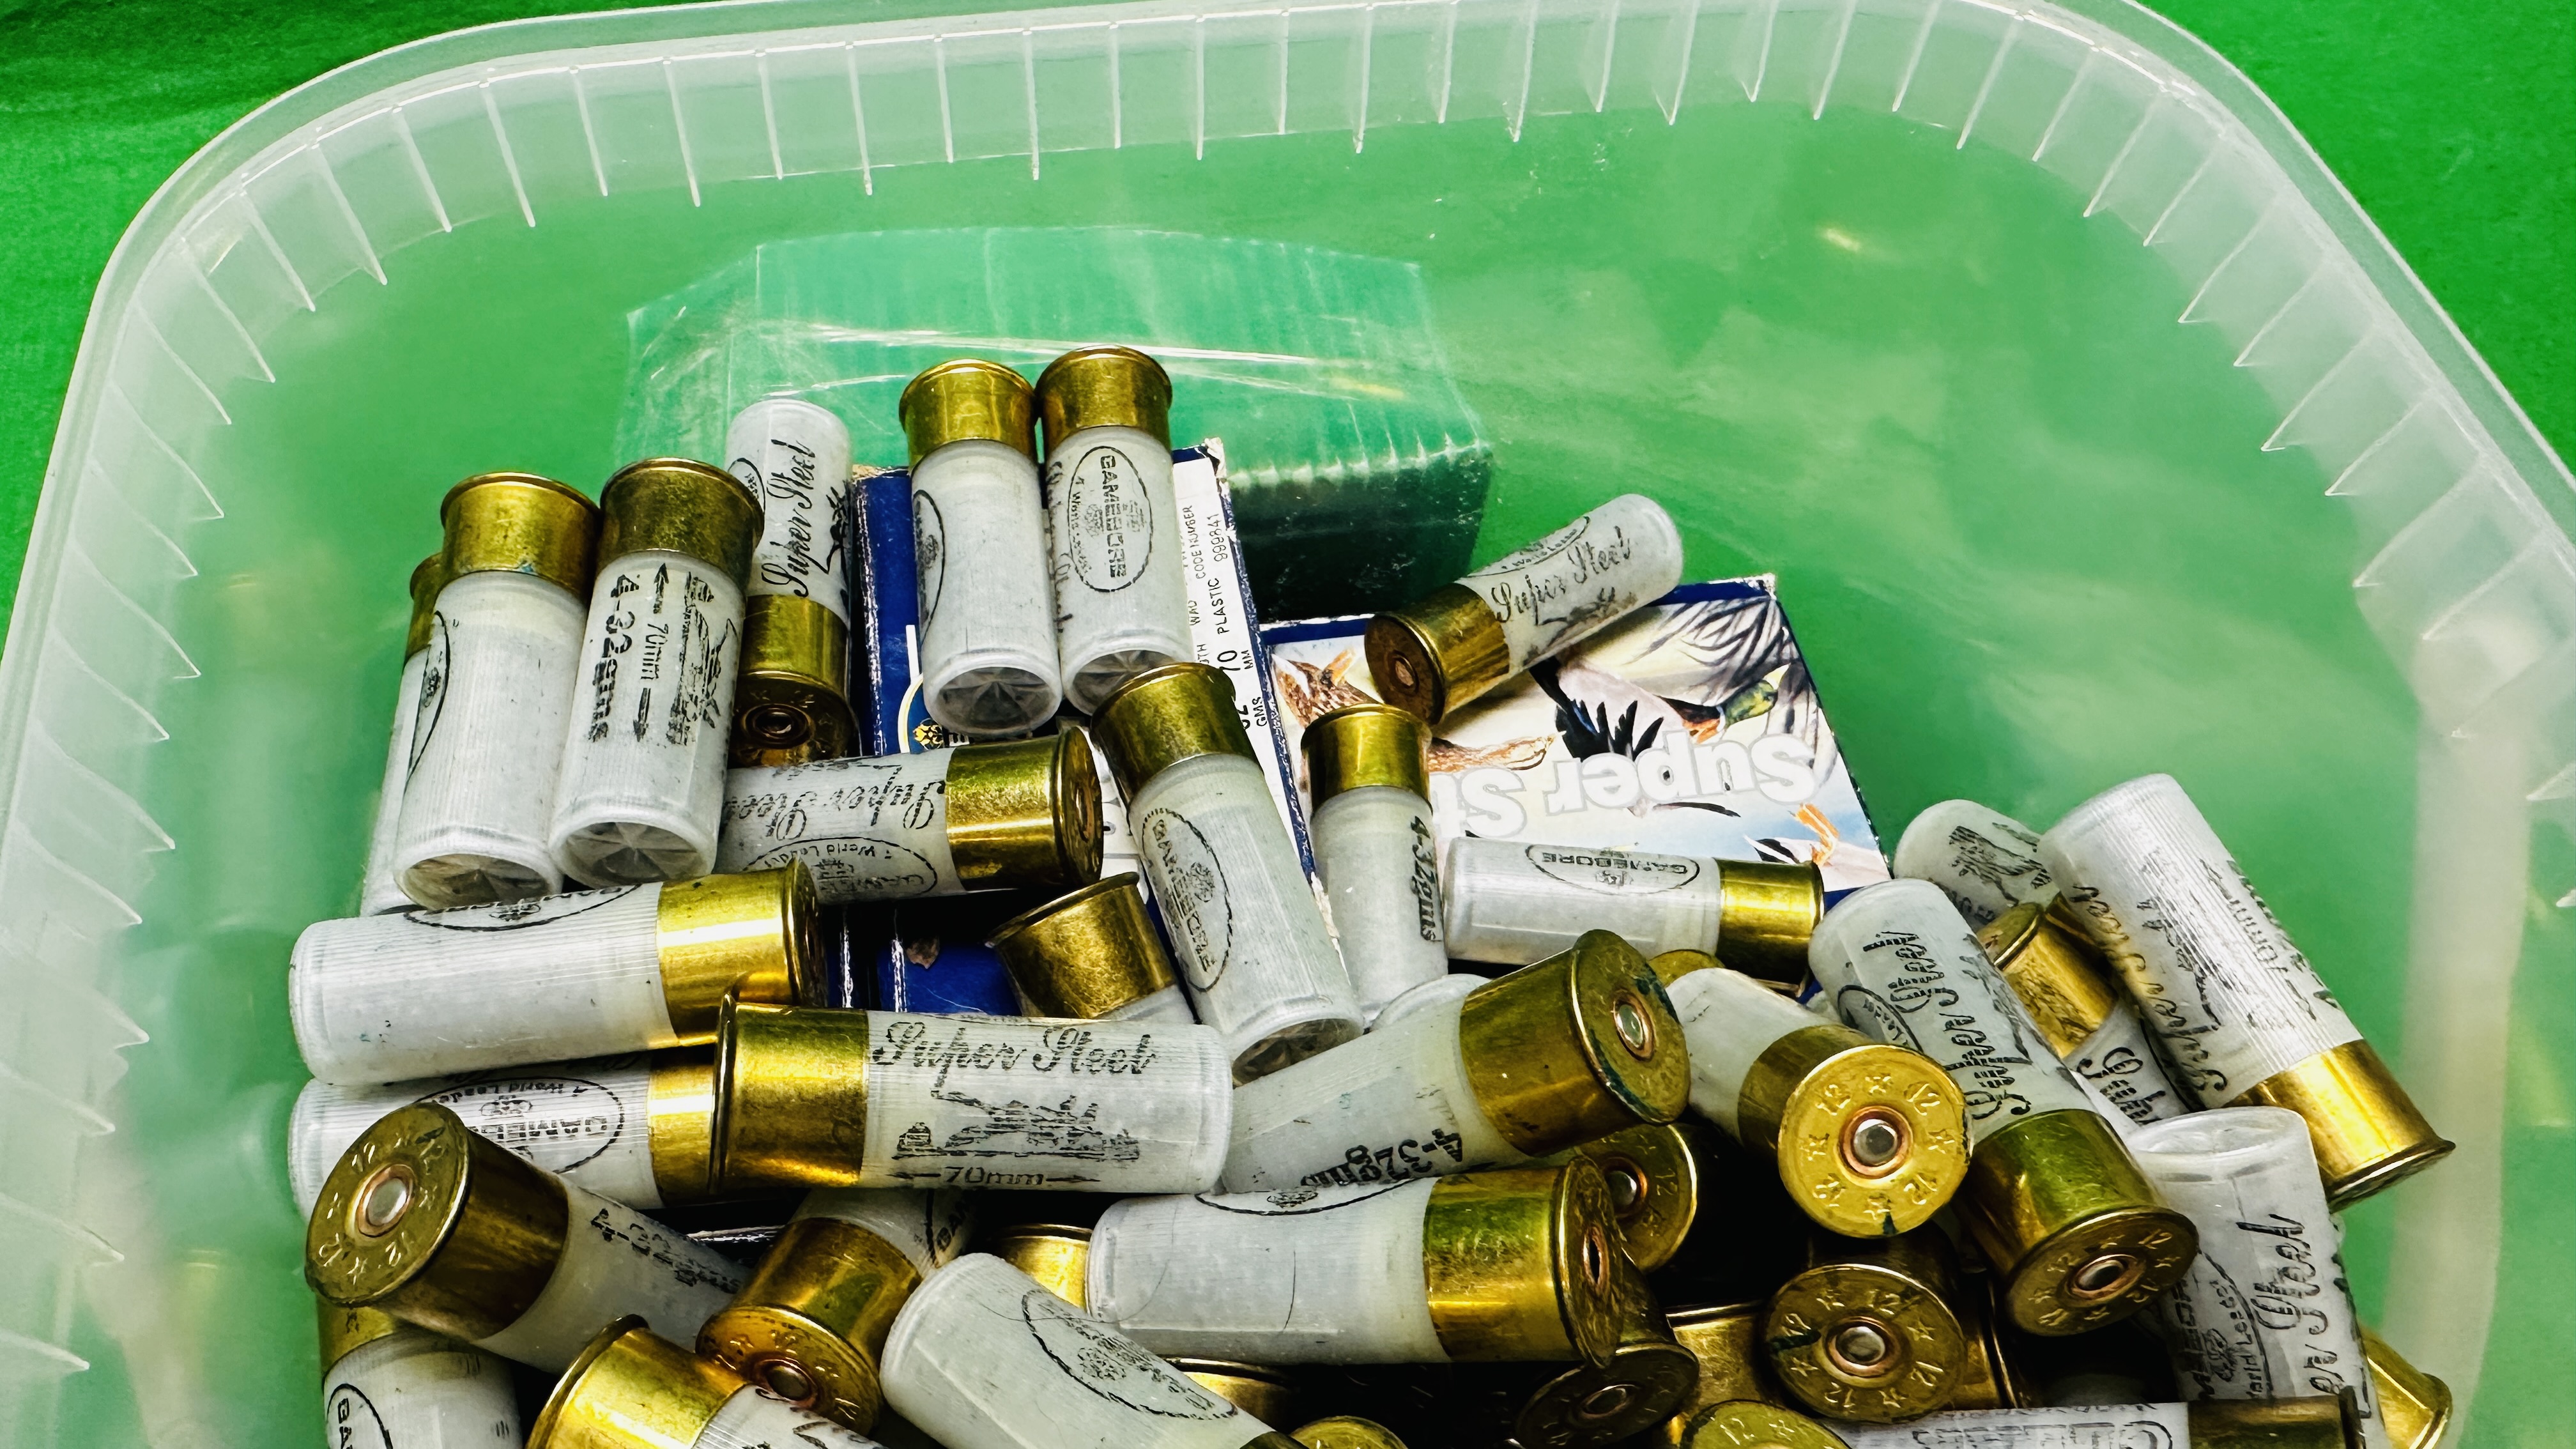 216 X GAMEBORE 12 GAUGE SUPER STEEL 32GM 4 SHOT CARTRIDGES - (TO BE COLLECTED IN PERSON BY LICENCE - Image 5 of 6